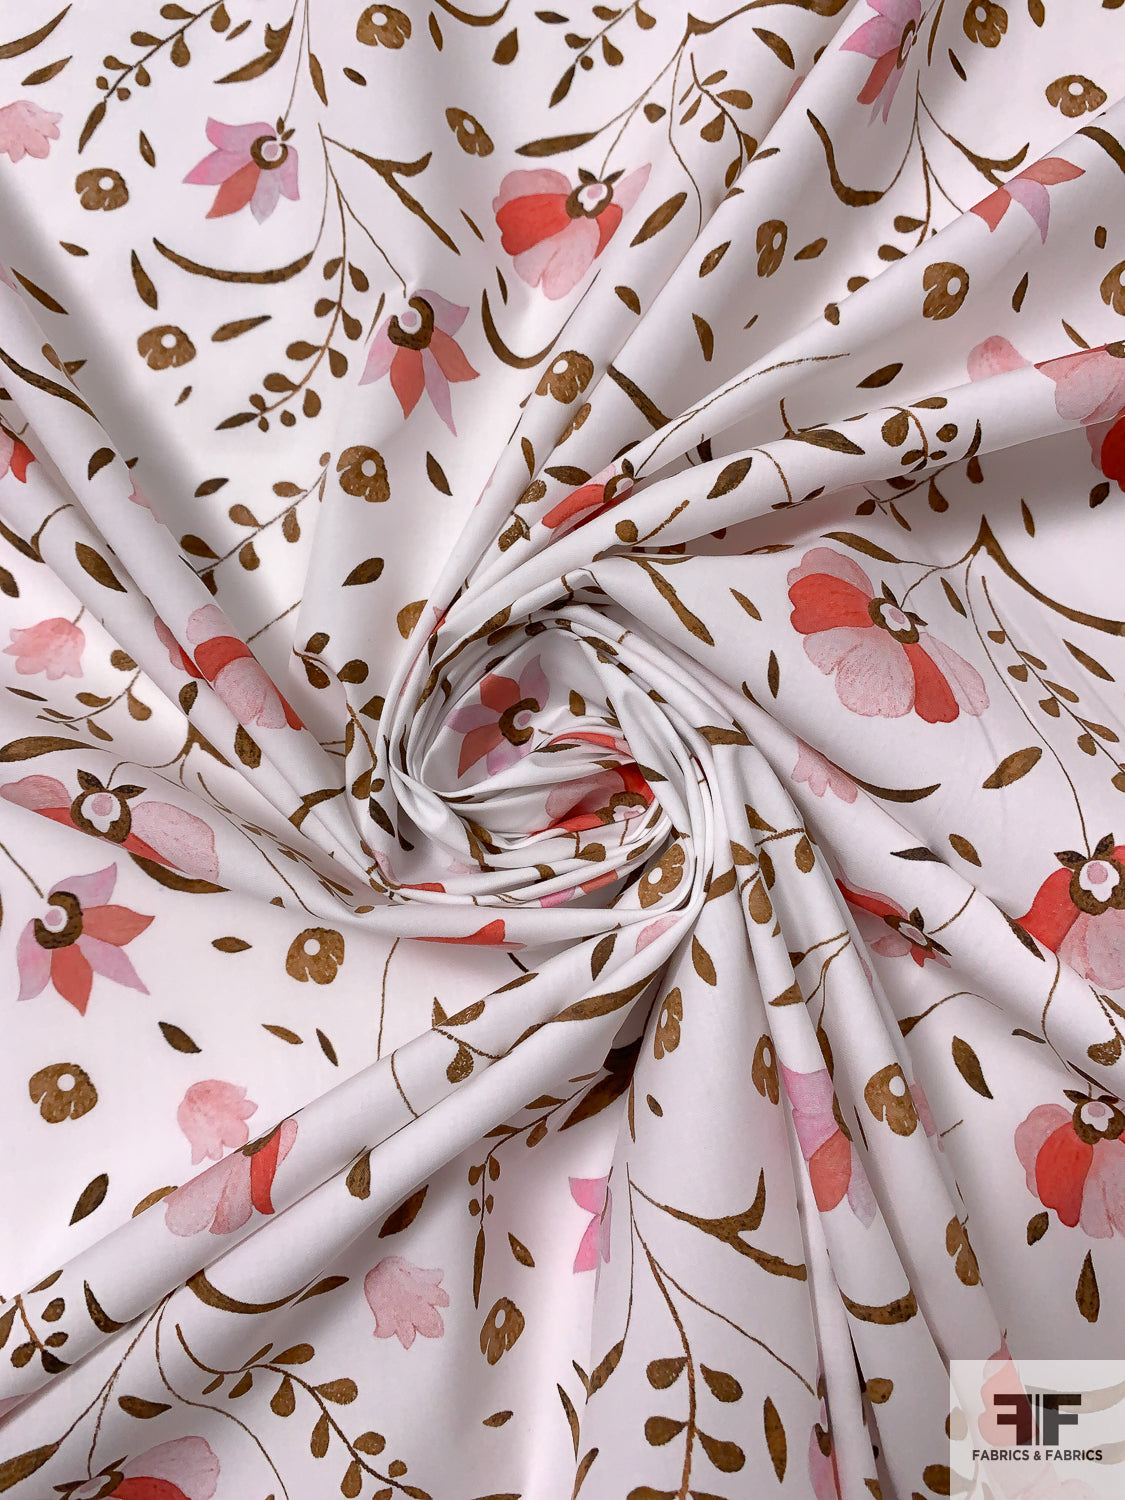 Jovial Leaf Stems and Floral Printed Cotton Lawn - Brown/Pinks